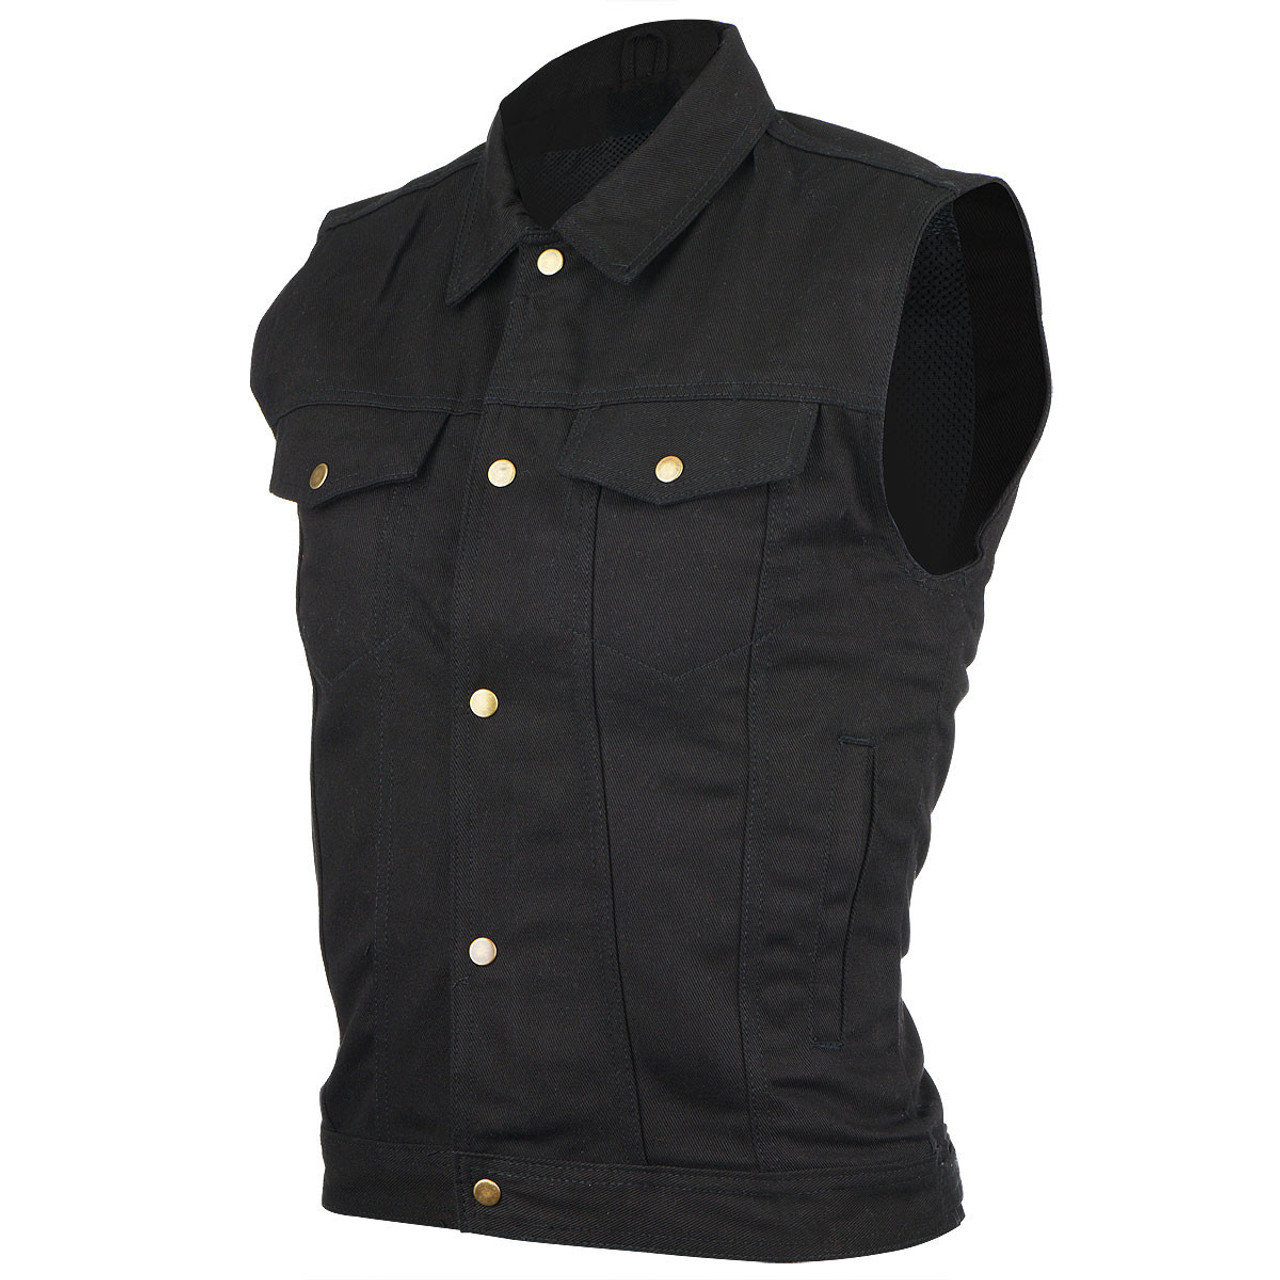 The Best Concealed Carry Vests for Men & Women - Team Motorcycle